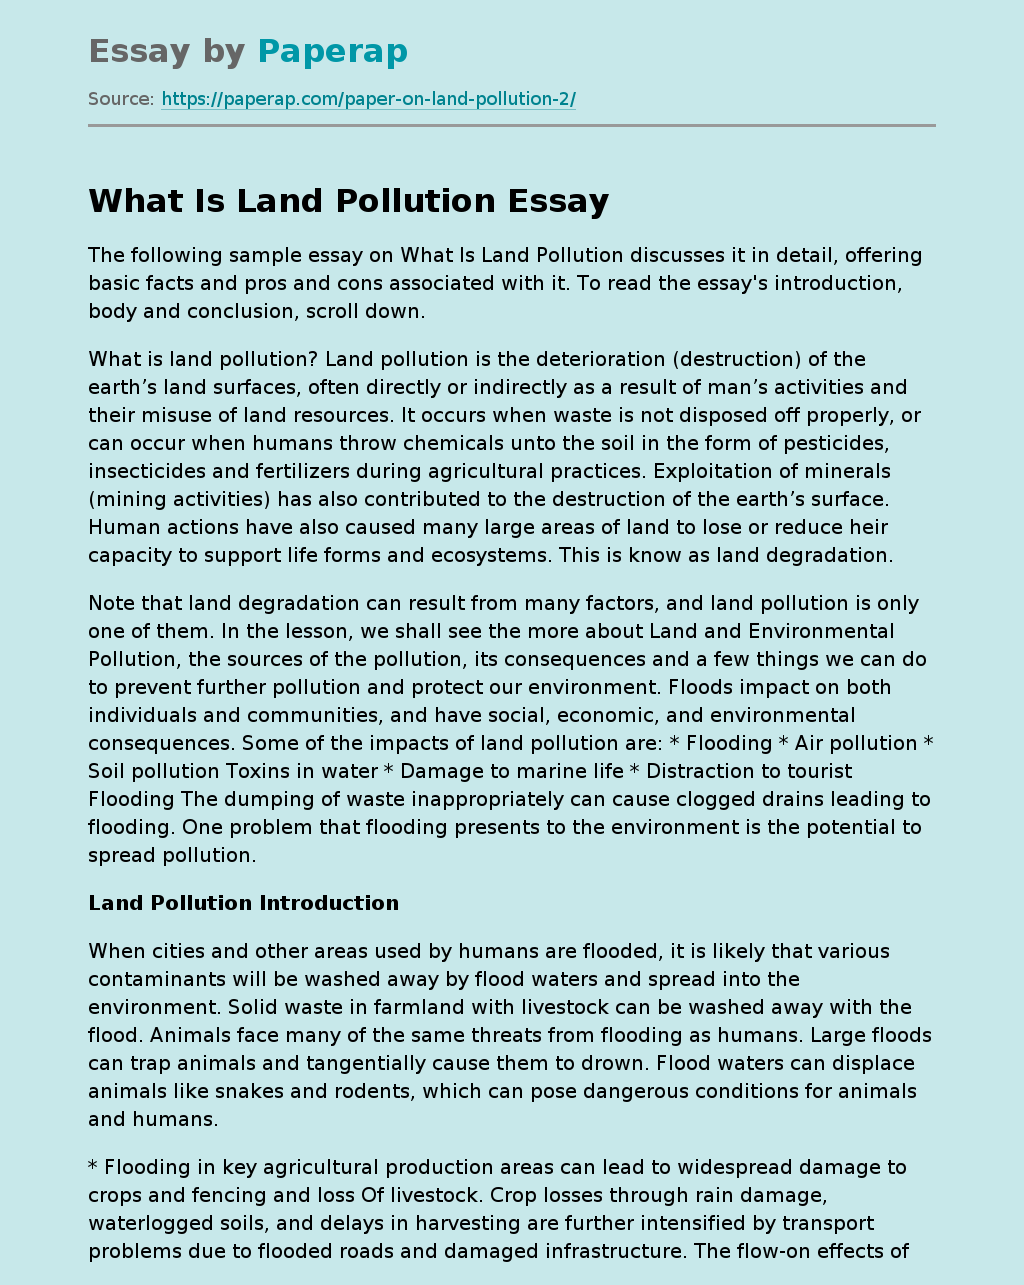 give essay on land pollution